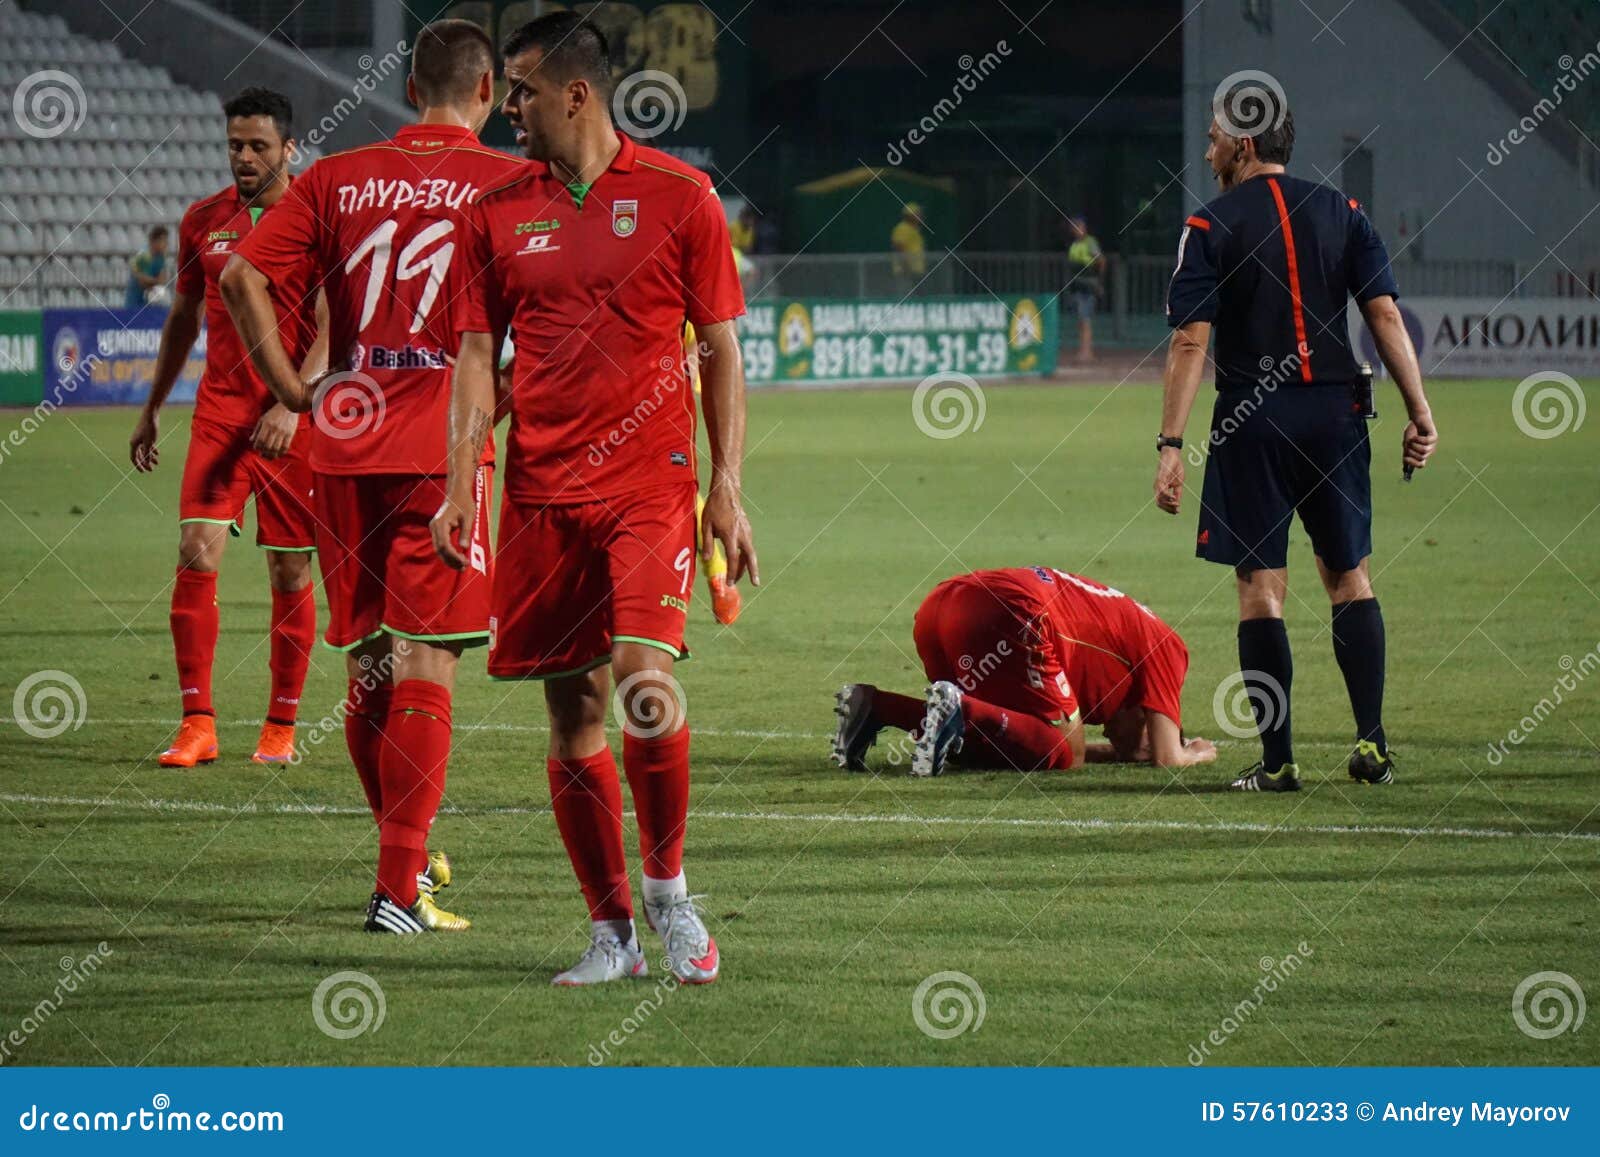 16.07.15 Spartak Moscow-youth 2-3 Ufa-youth, Game Moments